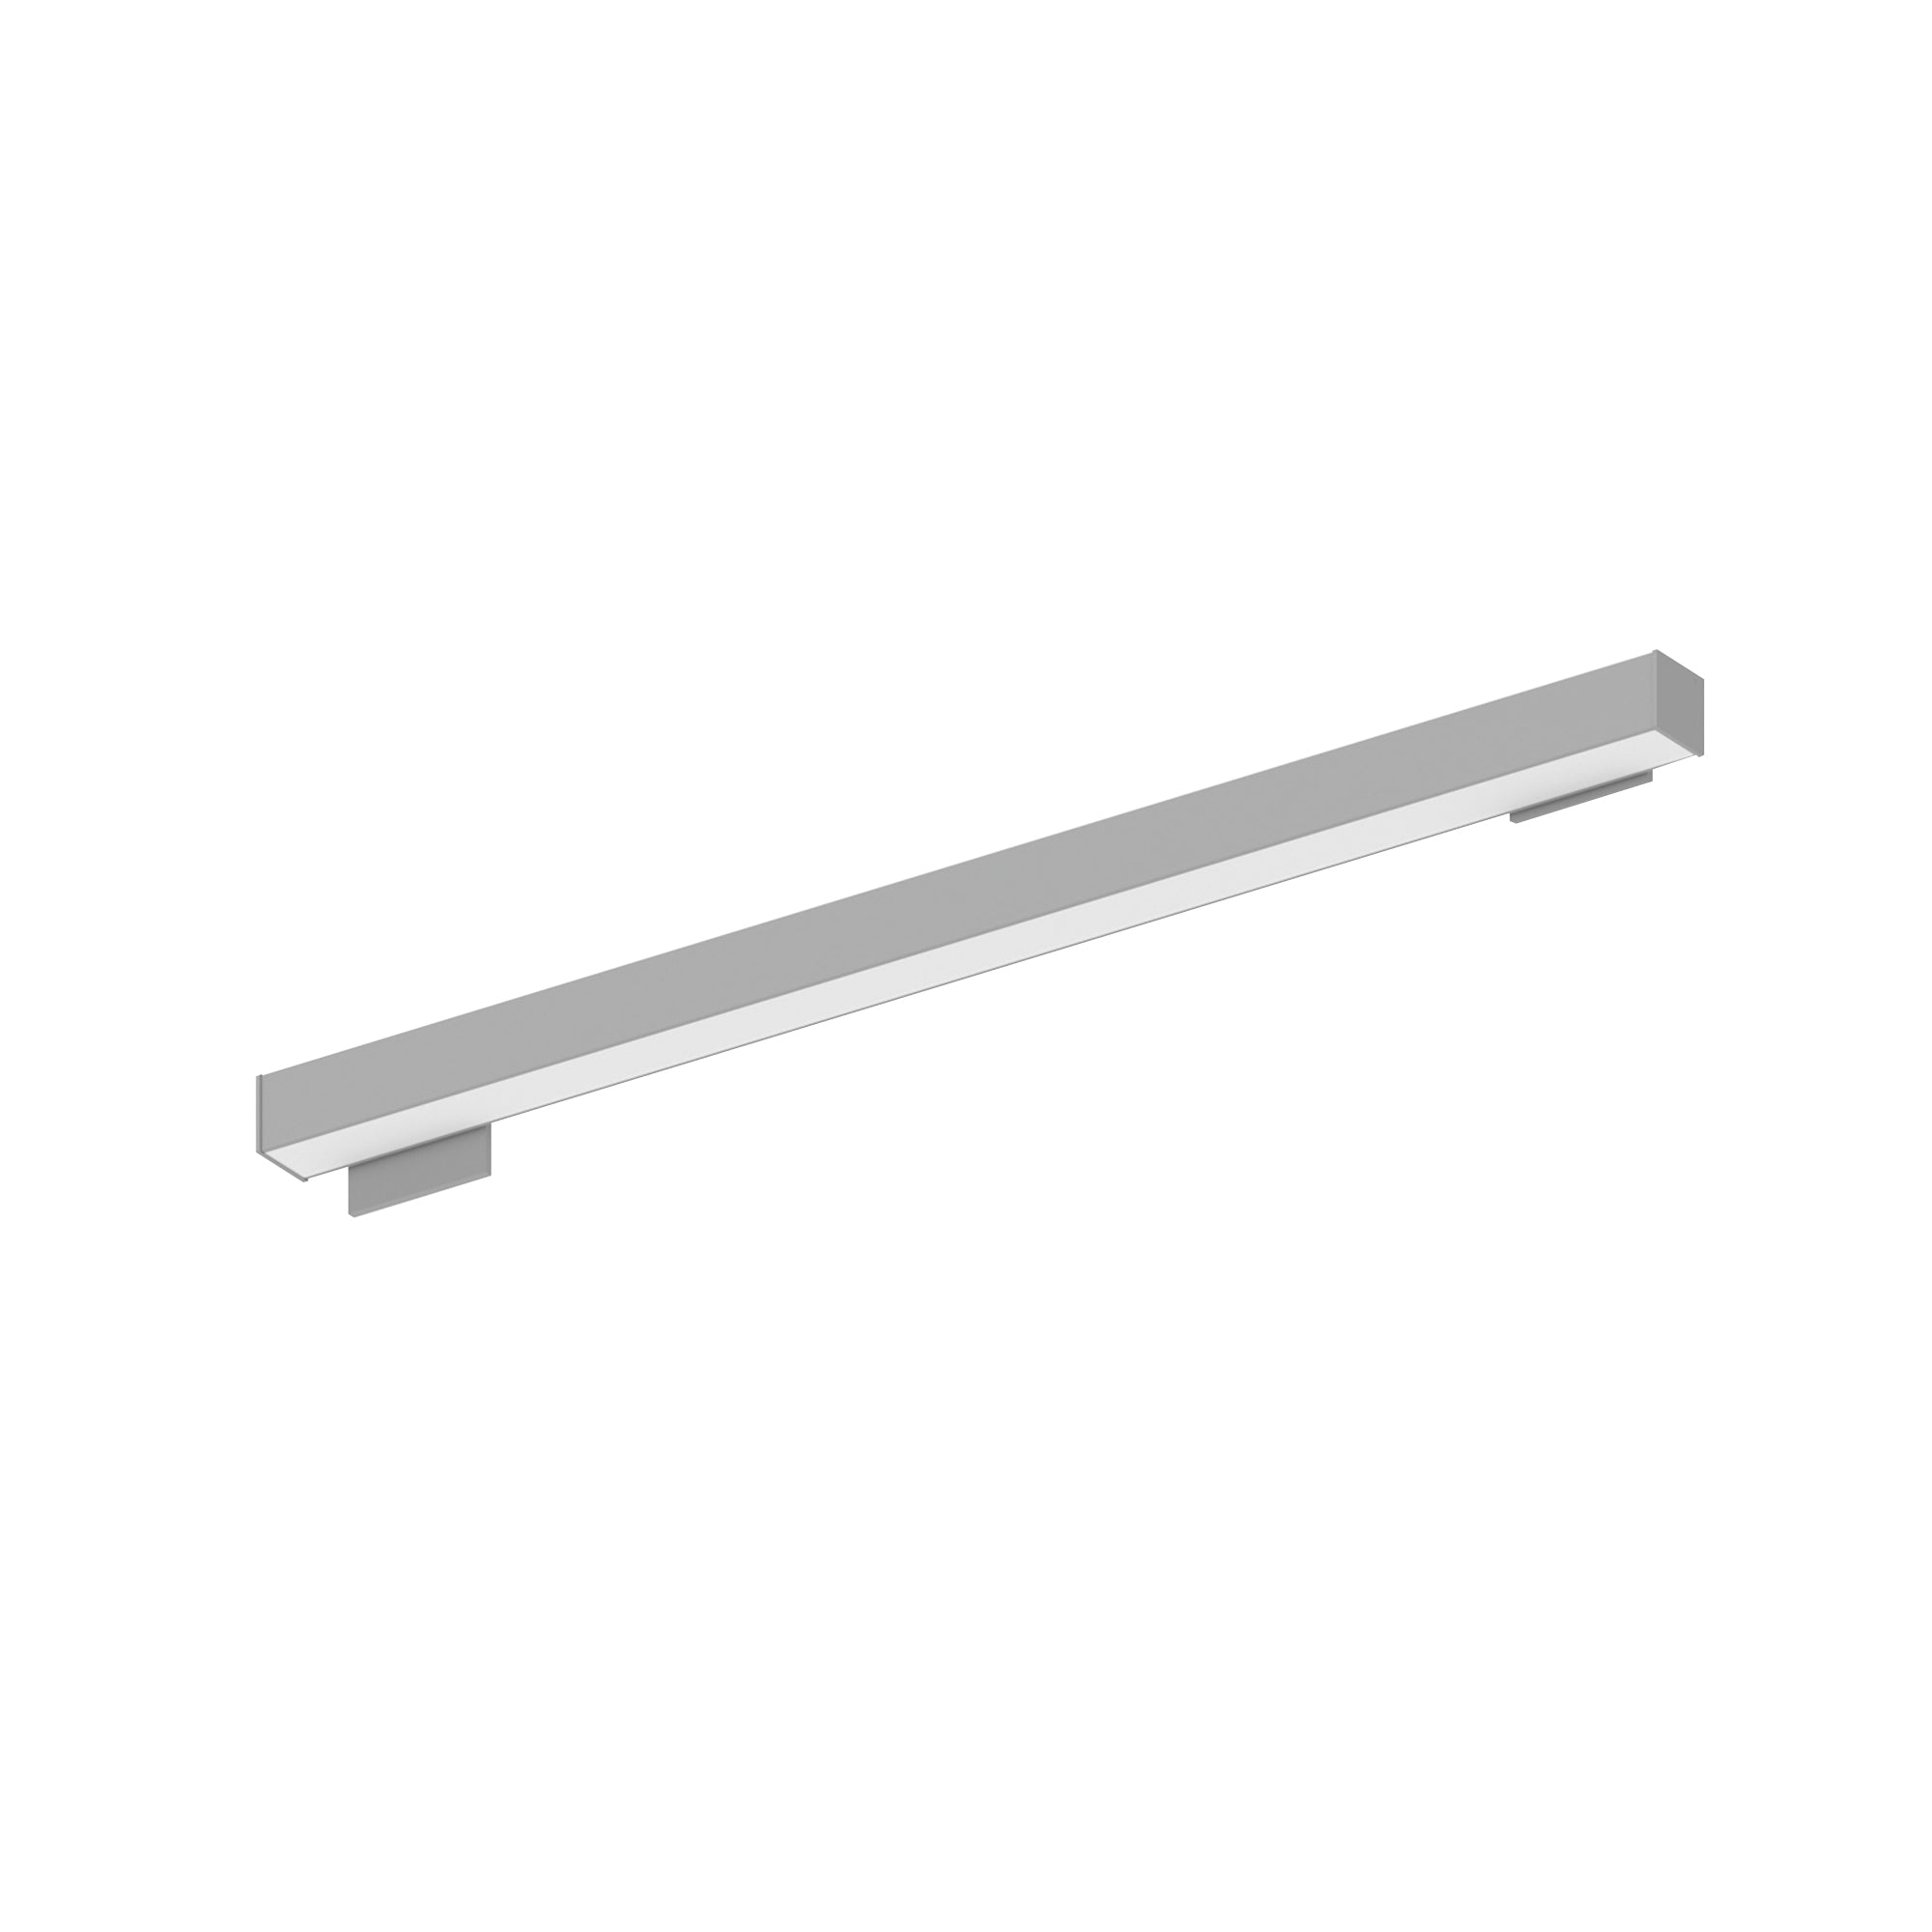 Nora Lighting NWLIN-41035A/L4P-R2 - Linear - 4' L-Line LED Wall Mount Linear, 4200lm / 3500K, 4 Inchx4 Inch Left Plate & 2 Inchx4 Inch Right Plate, Left Power Feed, Aluminum Finish